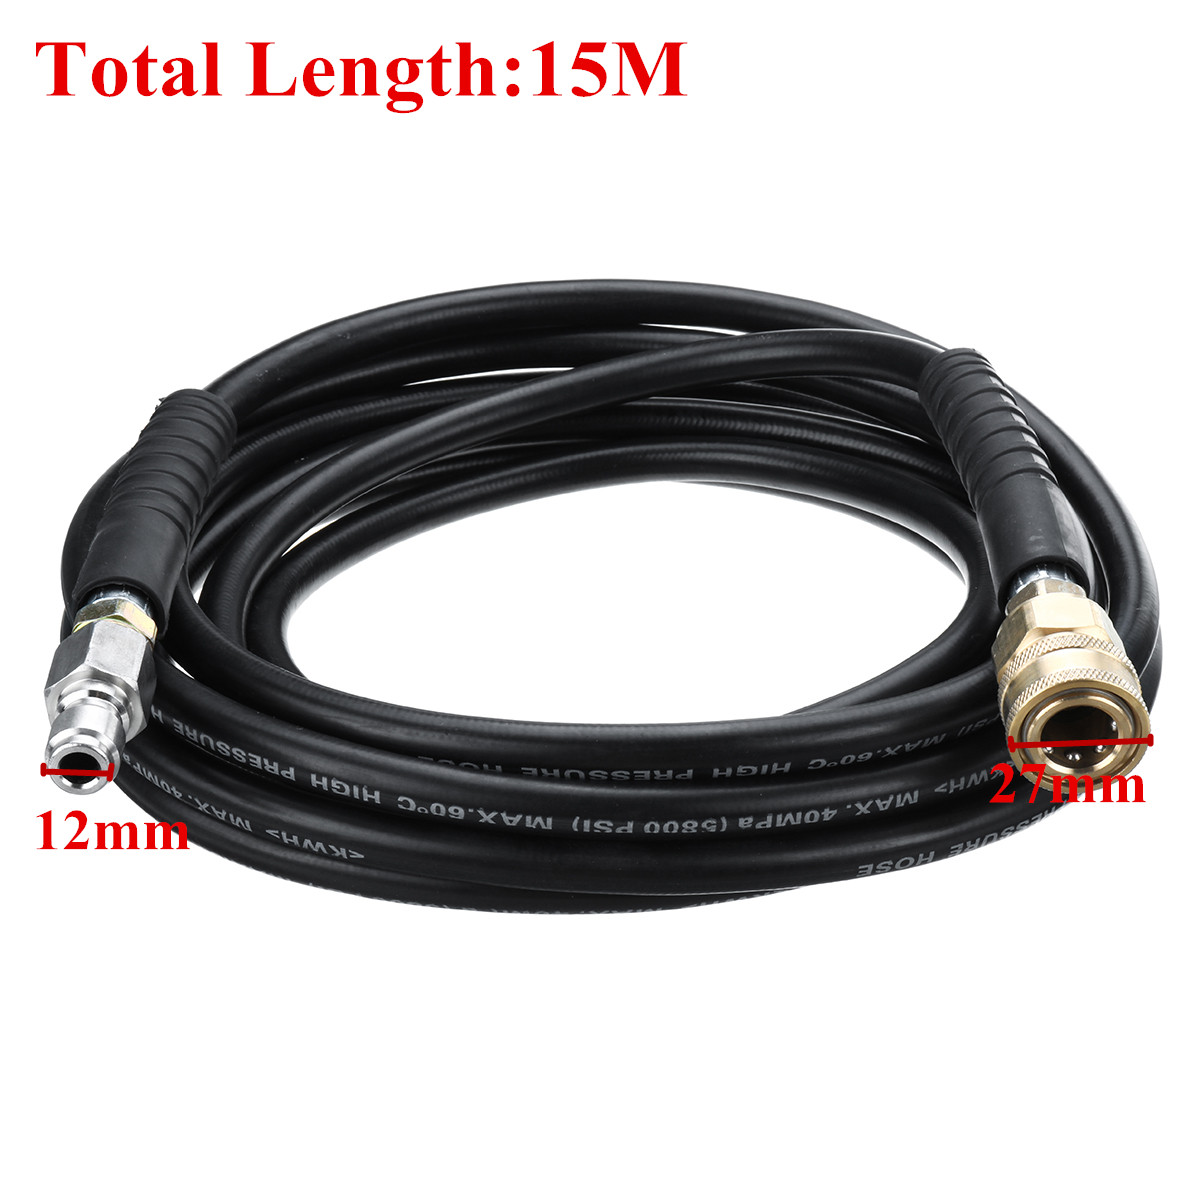 15M-38-Inch-Quick-Release-Hose-40MPa-High-Pressure-Washer-Hose-Cleaning-Tube-1558766-2